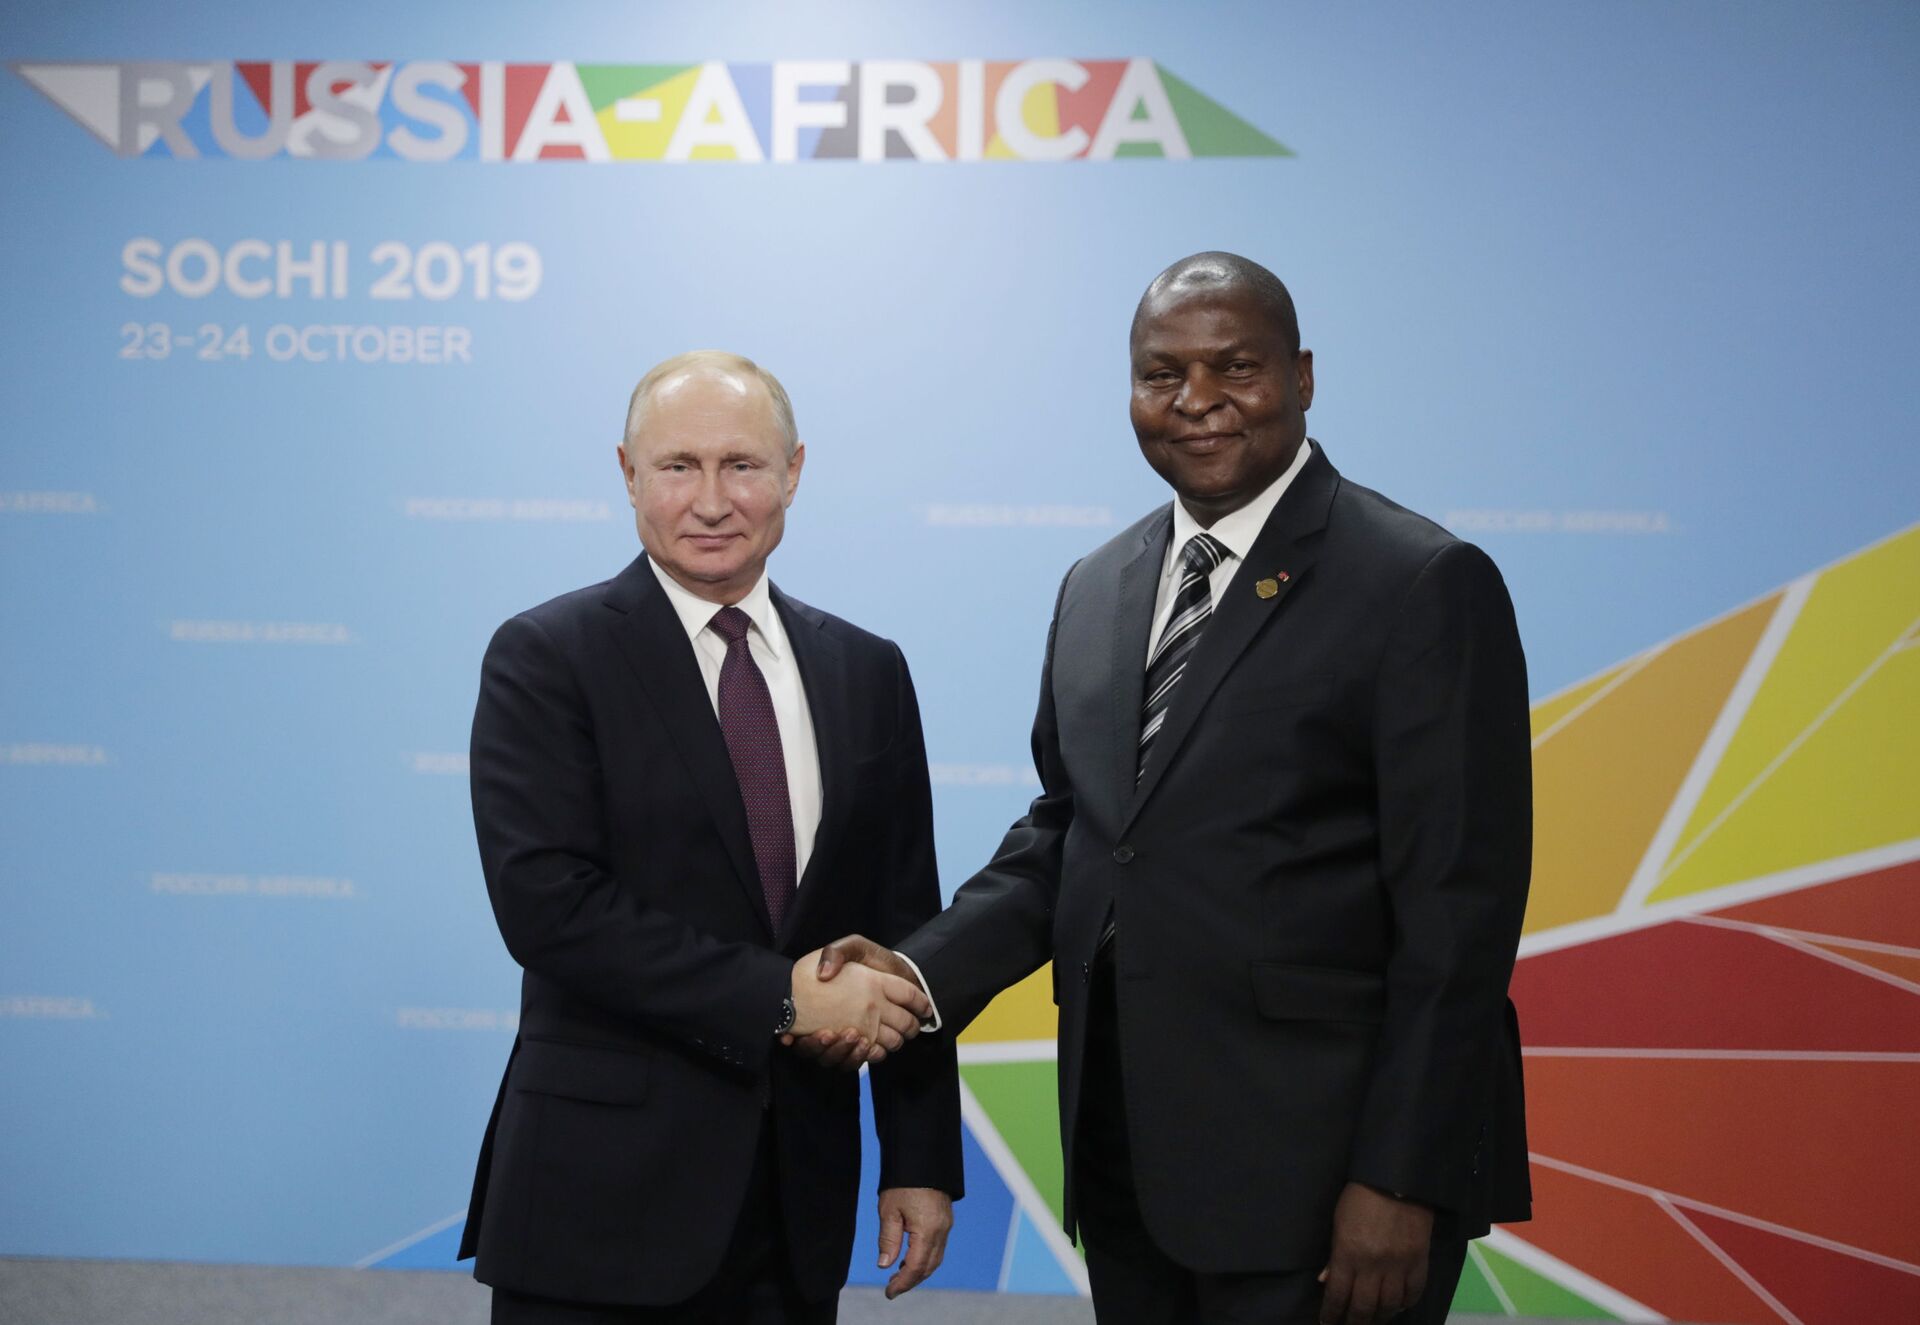 Russian President Vladimir Putin and Central African Republic President Faustin Archange Touadera shake hands as they pose for a photo prior to their meeting at the 2019 Russia-Africa Summit and Economic Forum in Sochi, Russia - Sputnik International, 1920, 11.10.2022